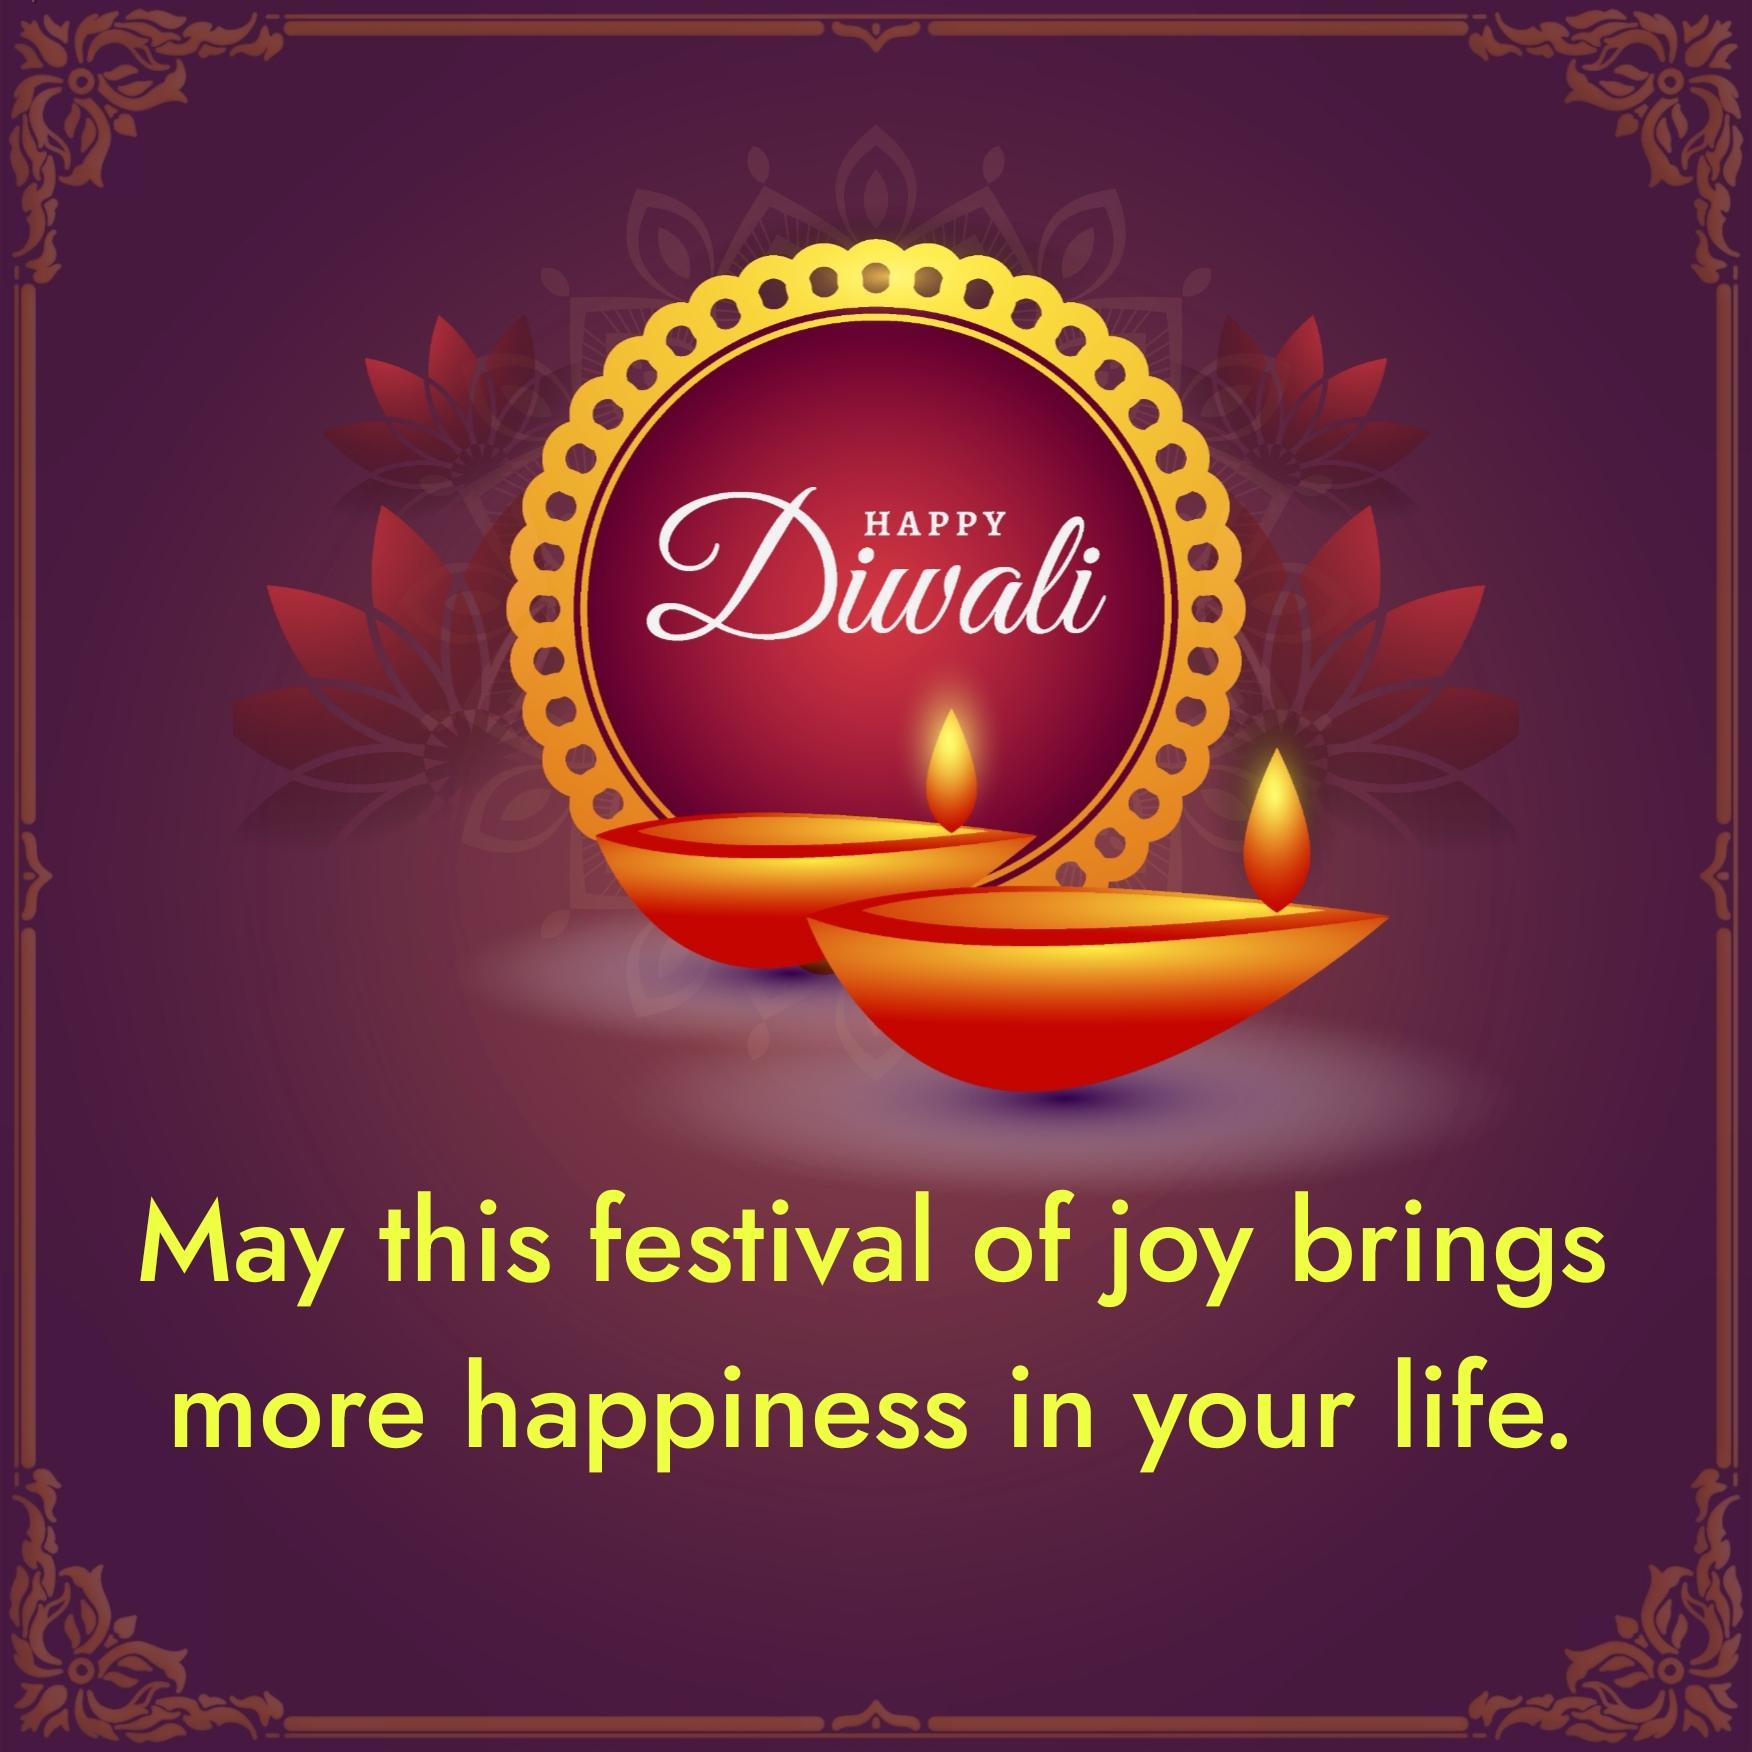 May this festival of joy brings more happiness in your life